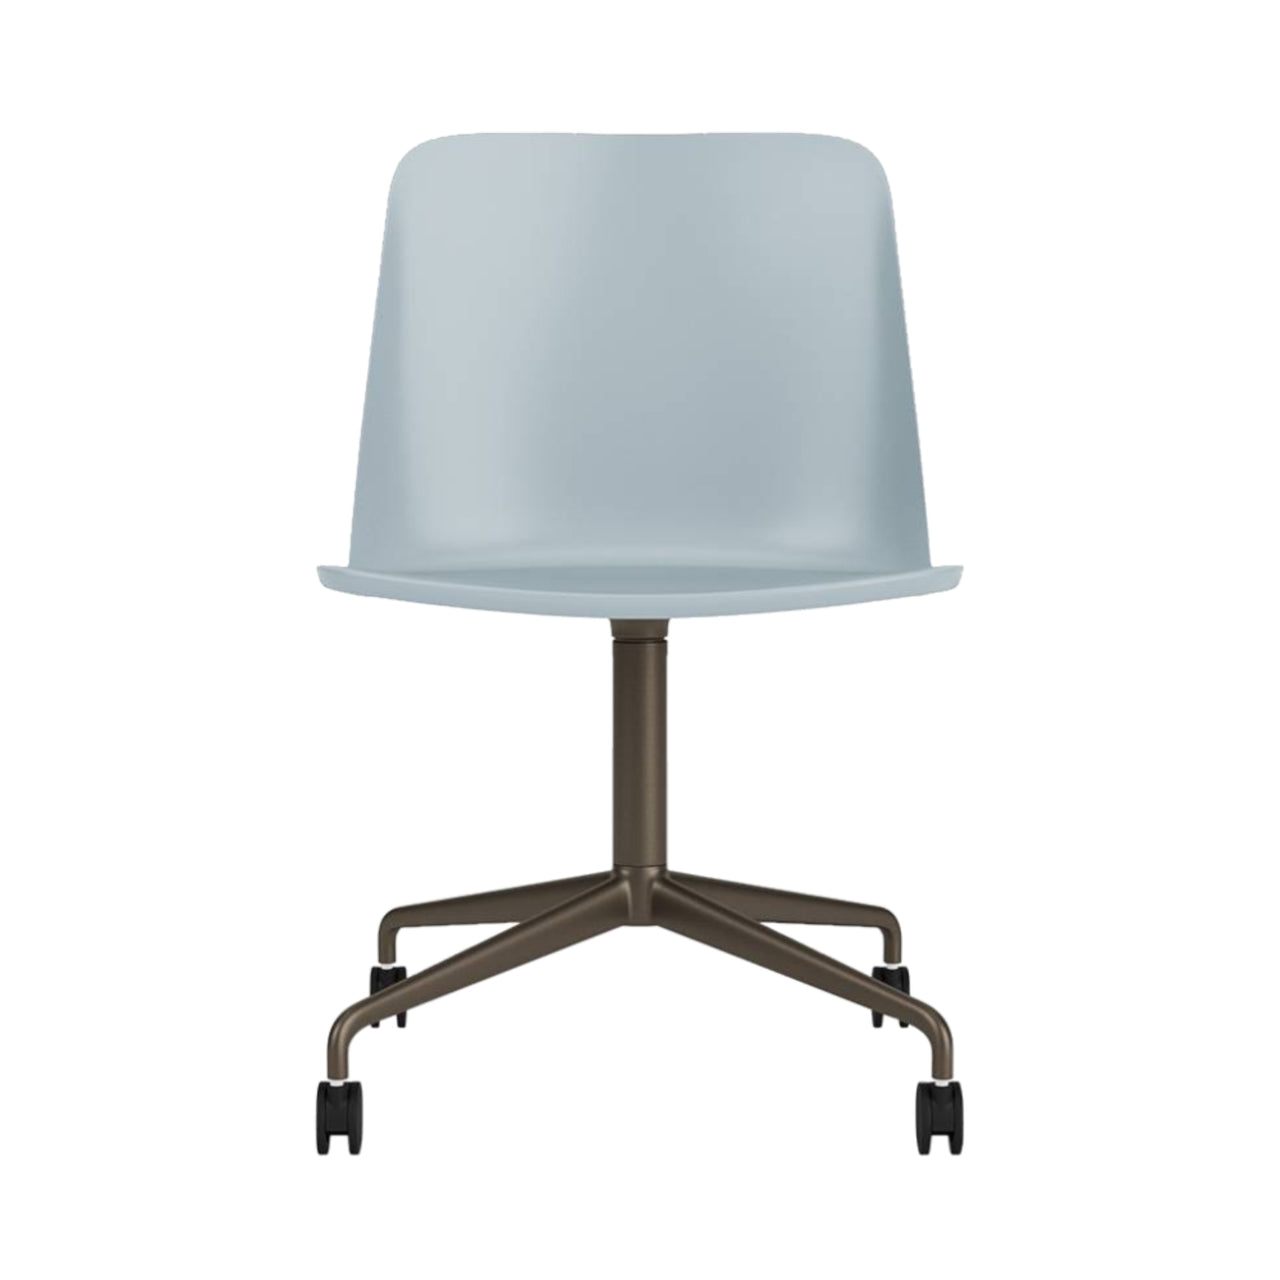 Rely Chair HW21: Light Blue + Bronzed